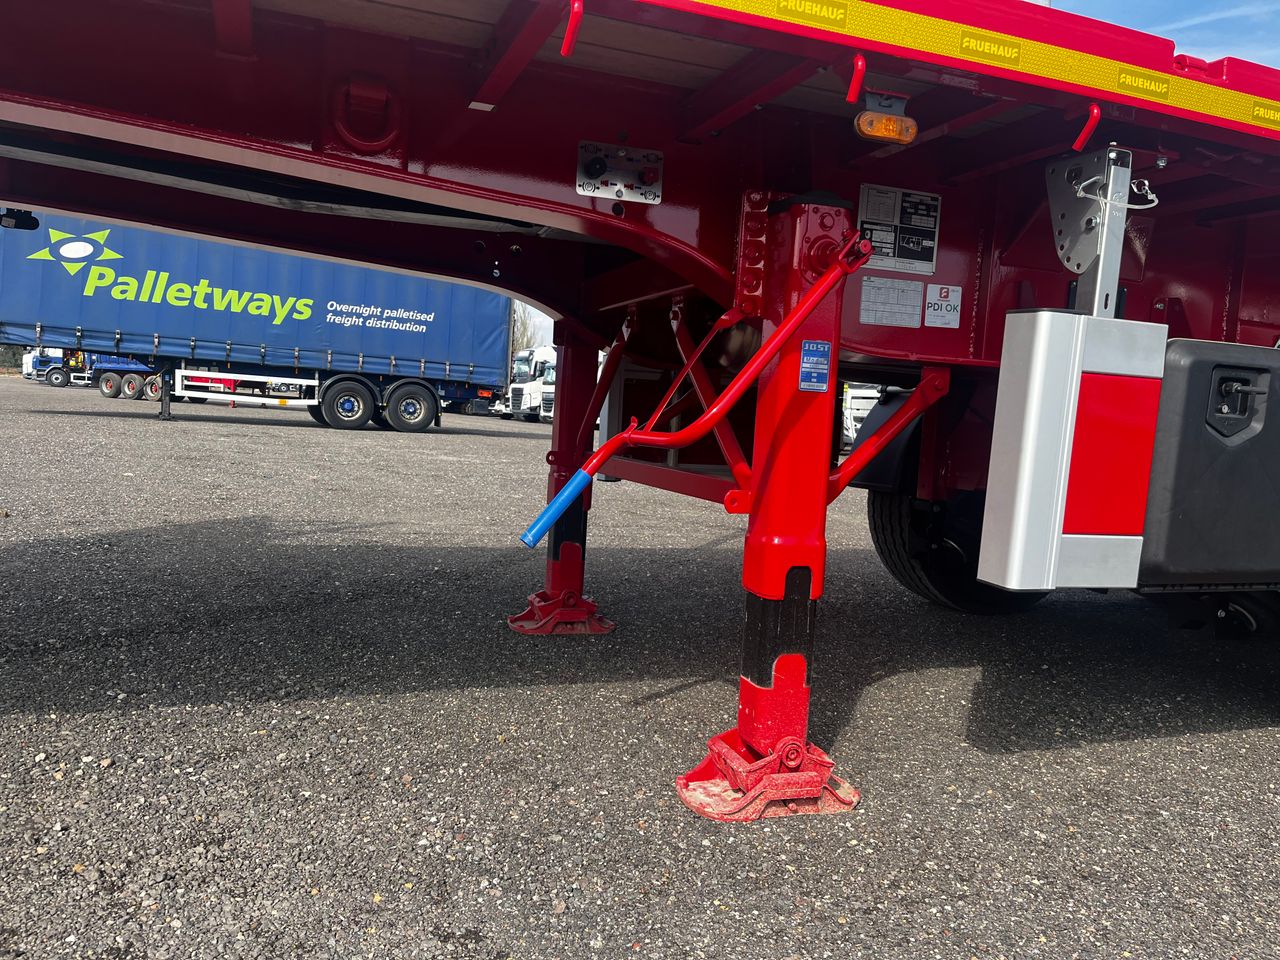 Ready to go Fruehauf 10mt Urban Flatbed Tri-Axle Trailer , Trailers, N/A, -, , , Alloy Wheels, Fall Arrest System, Tridec Rearsteer, Metal Headboard, Work Lights, , -, - | for sale at MV Commercial, the UKs leading Truck, Trailers and Van supplier. (SFRPSKSD3PG477401 119406)